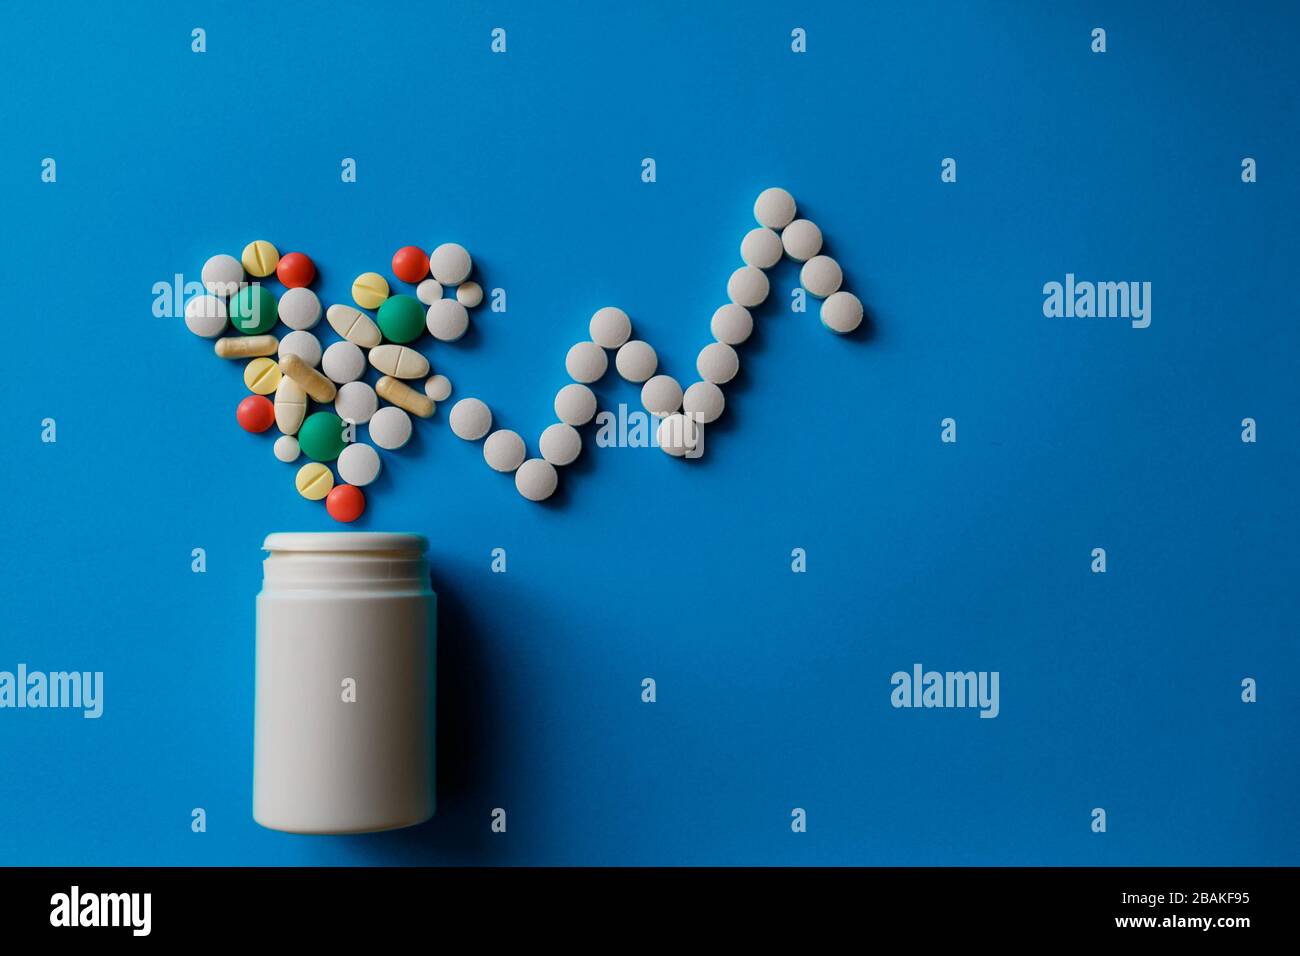 Heap of pills on blue background Assorted pharmaceutical medicine pills, tablets and capsules and bottle on blue background. Stock Photo